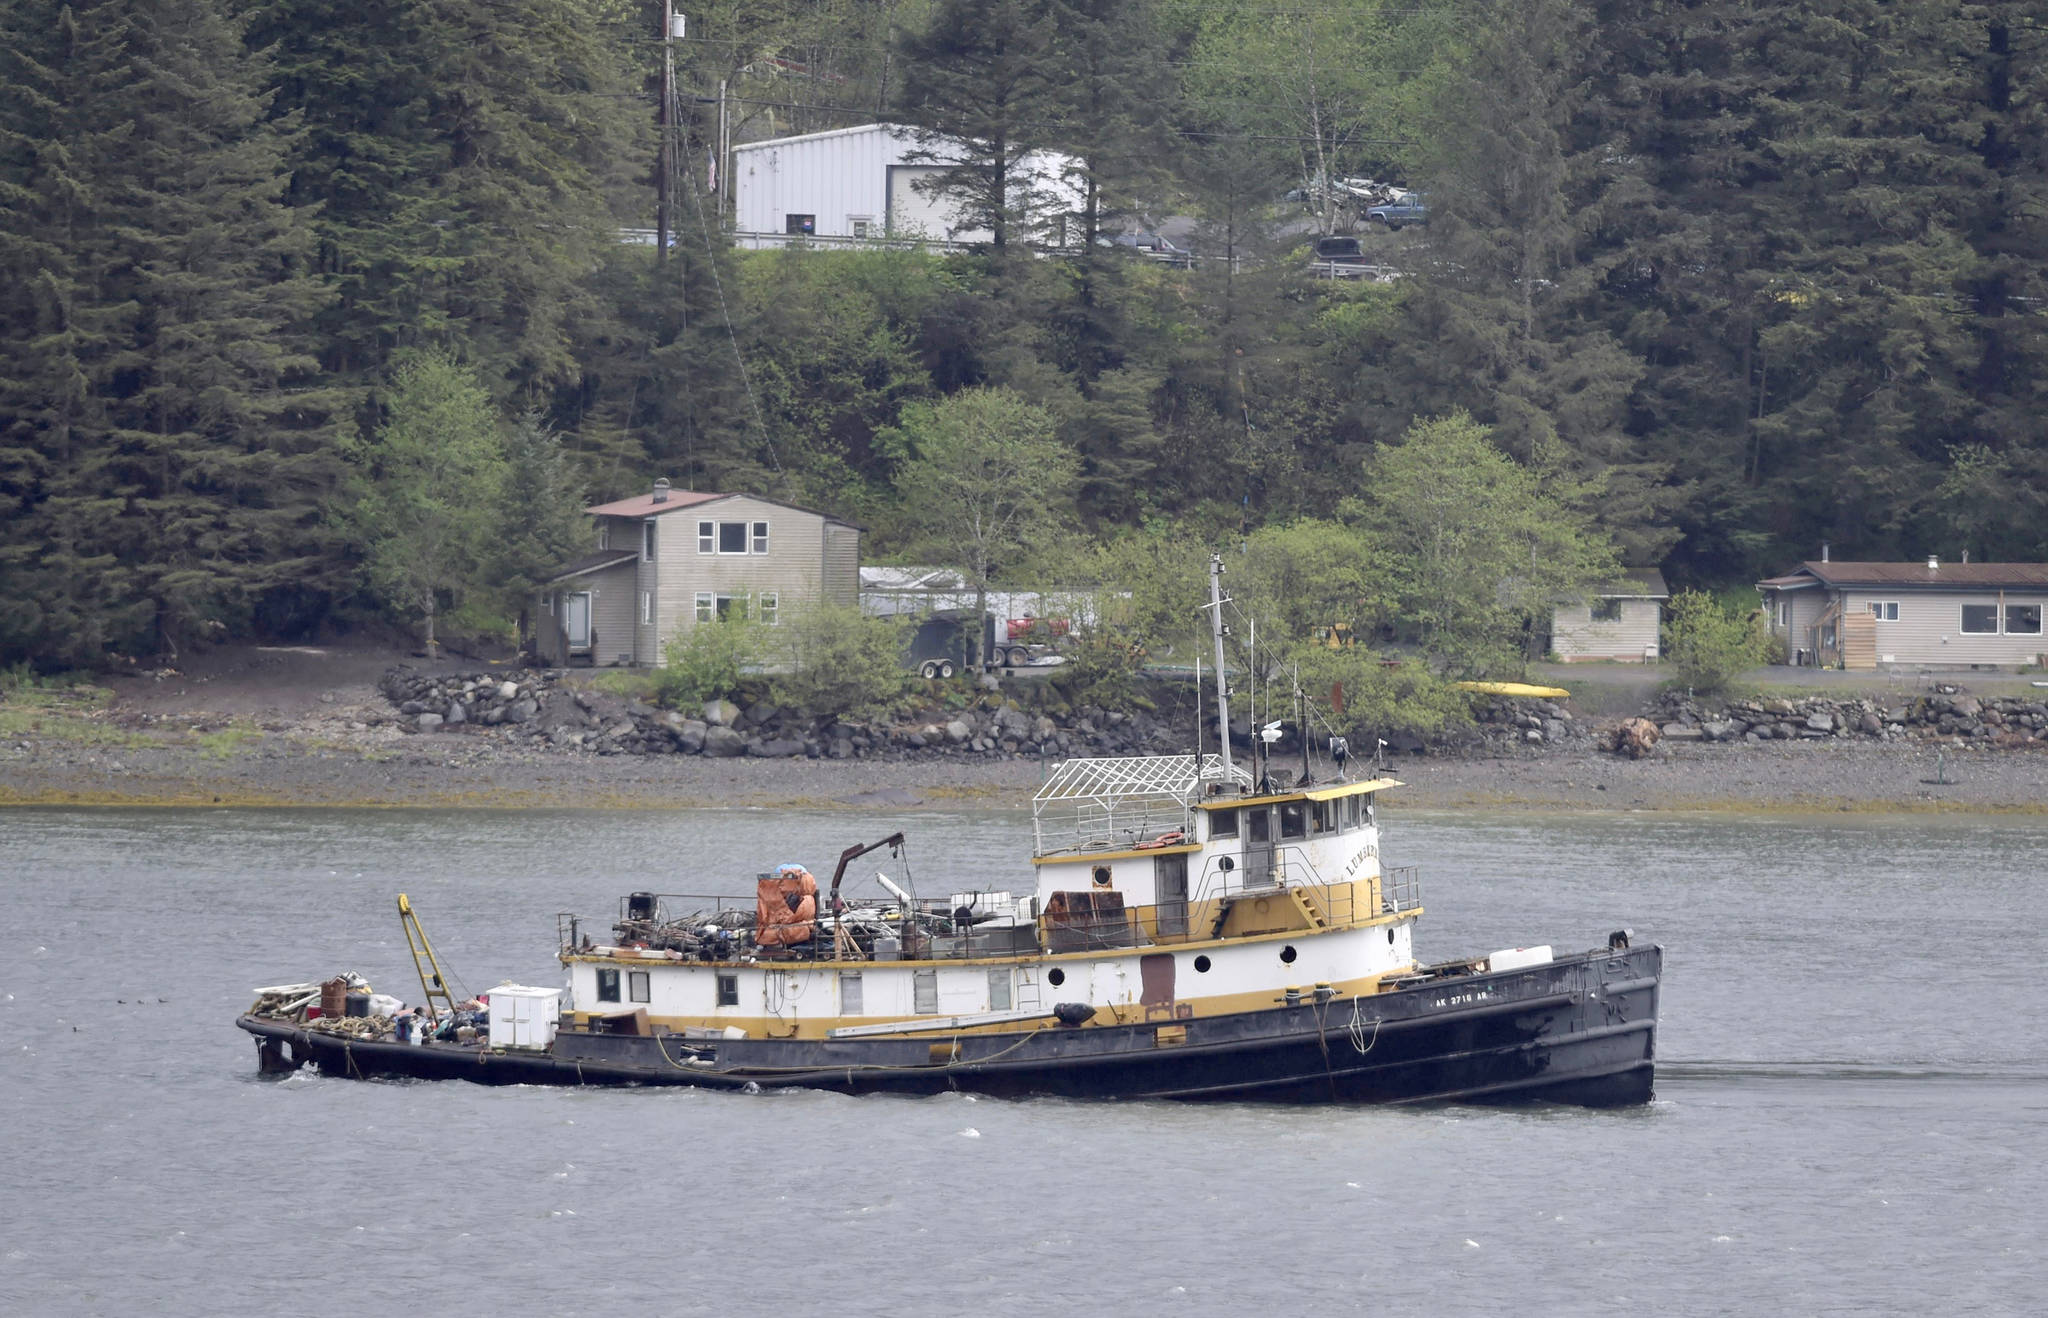 The tugboat Lumberman is seen aground in Gastineau Channel on Monday, May 21, 2018. (Michael Penn | Juneau Empire photo)